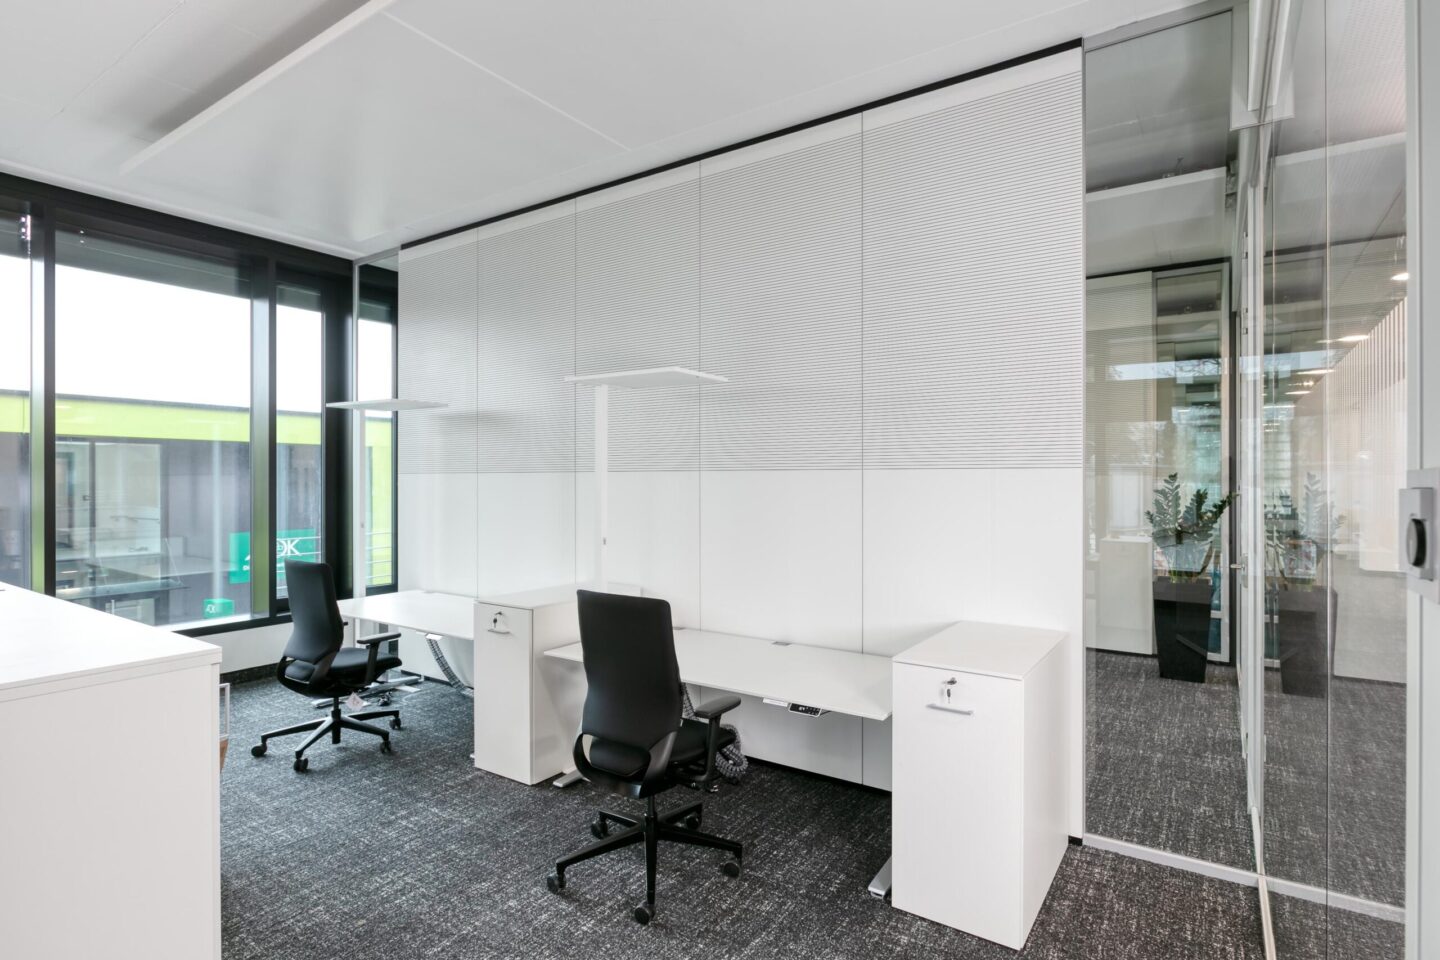 AOK District Office Hochrhein-Bodensee │ frame-integrated technology door side panels │ structural glazing